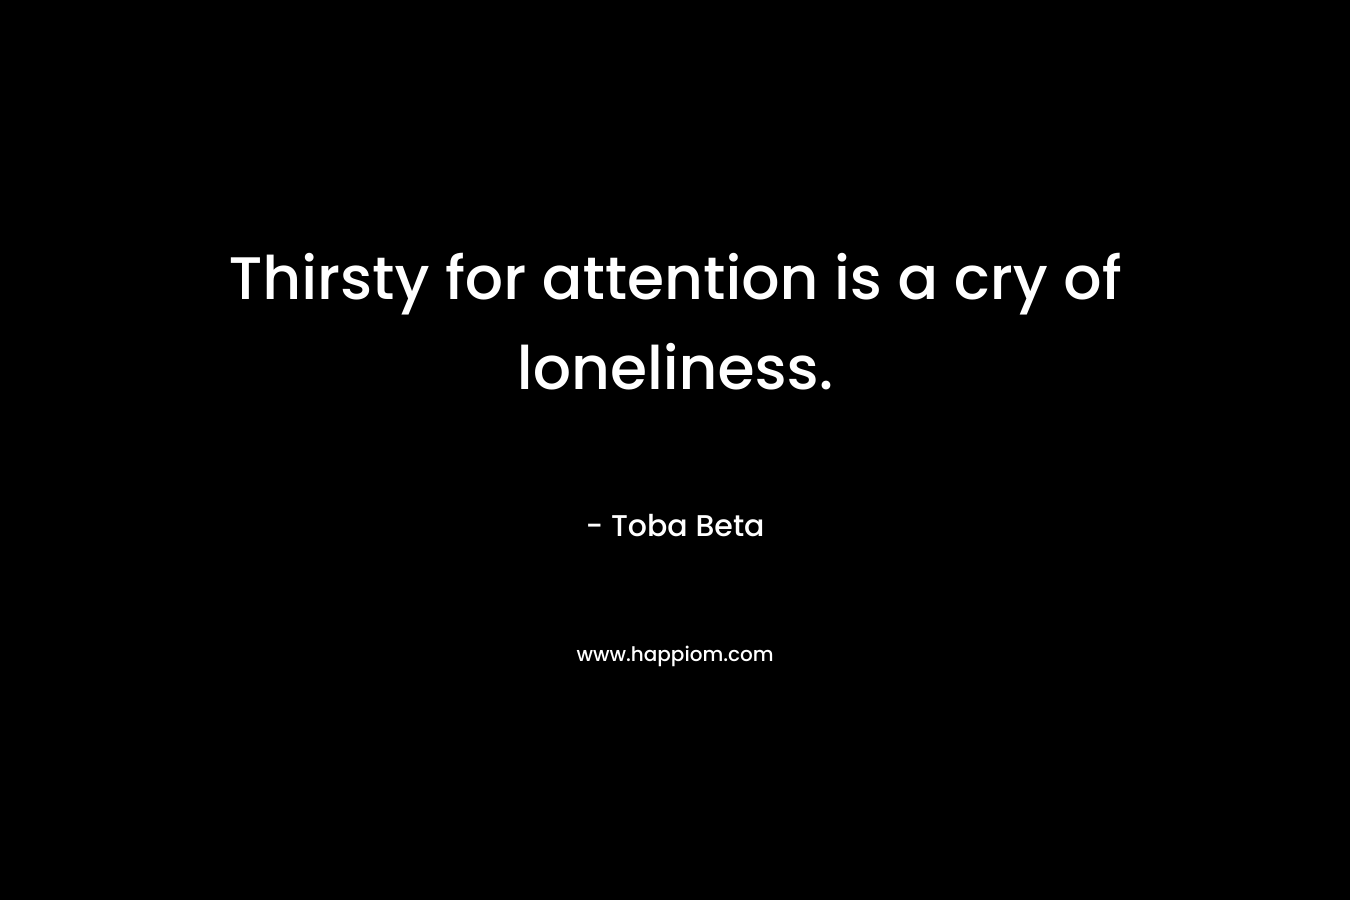 Thirsty for attention is a cry of loneliness.